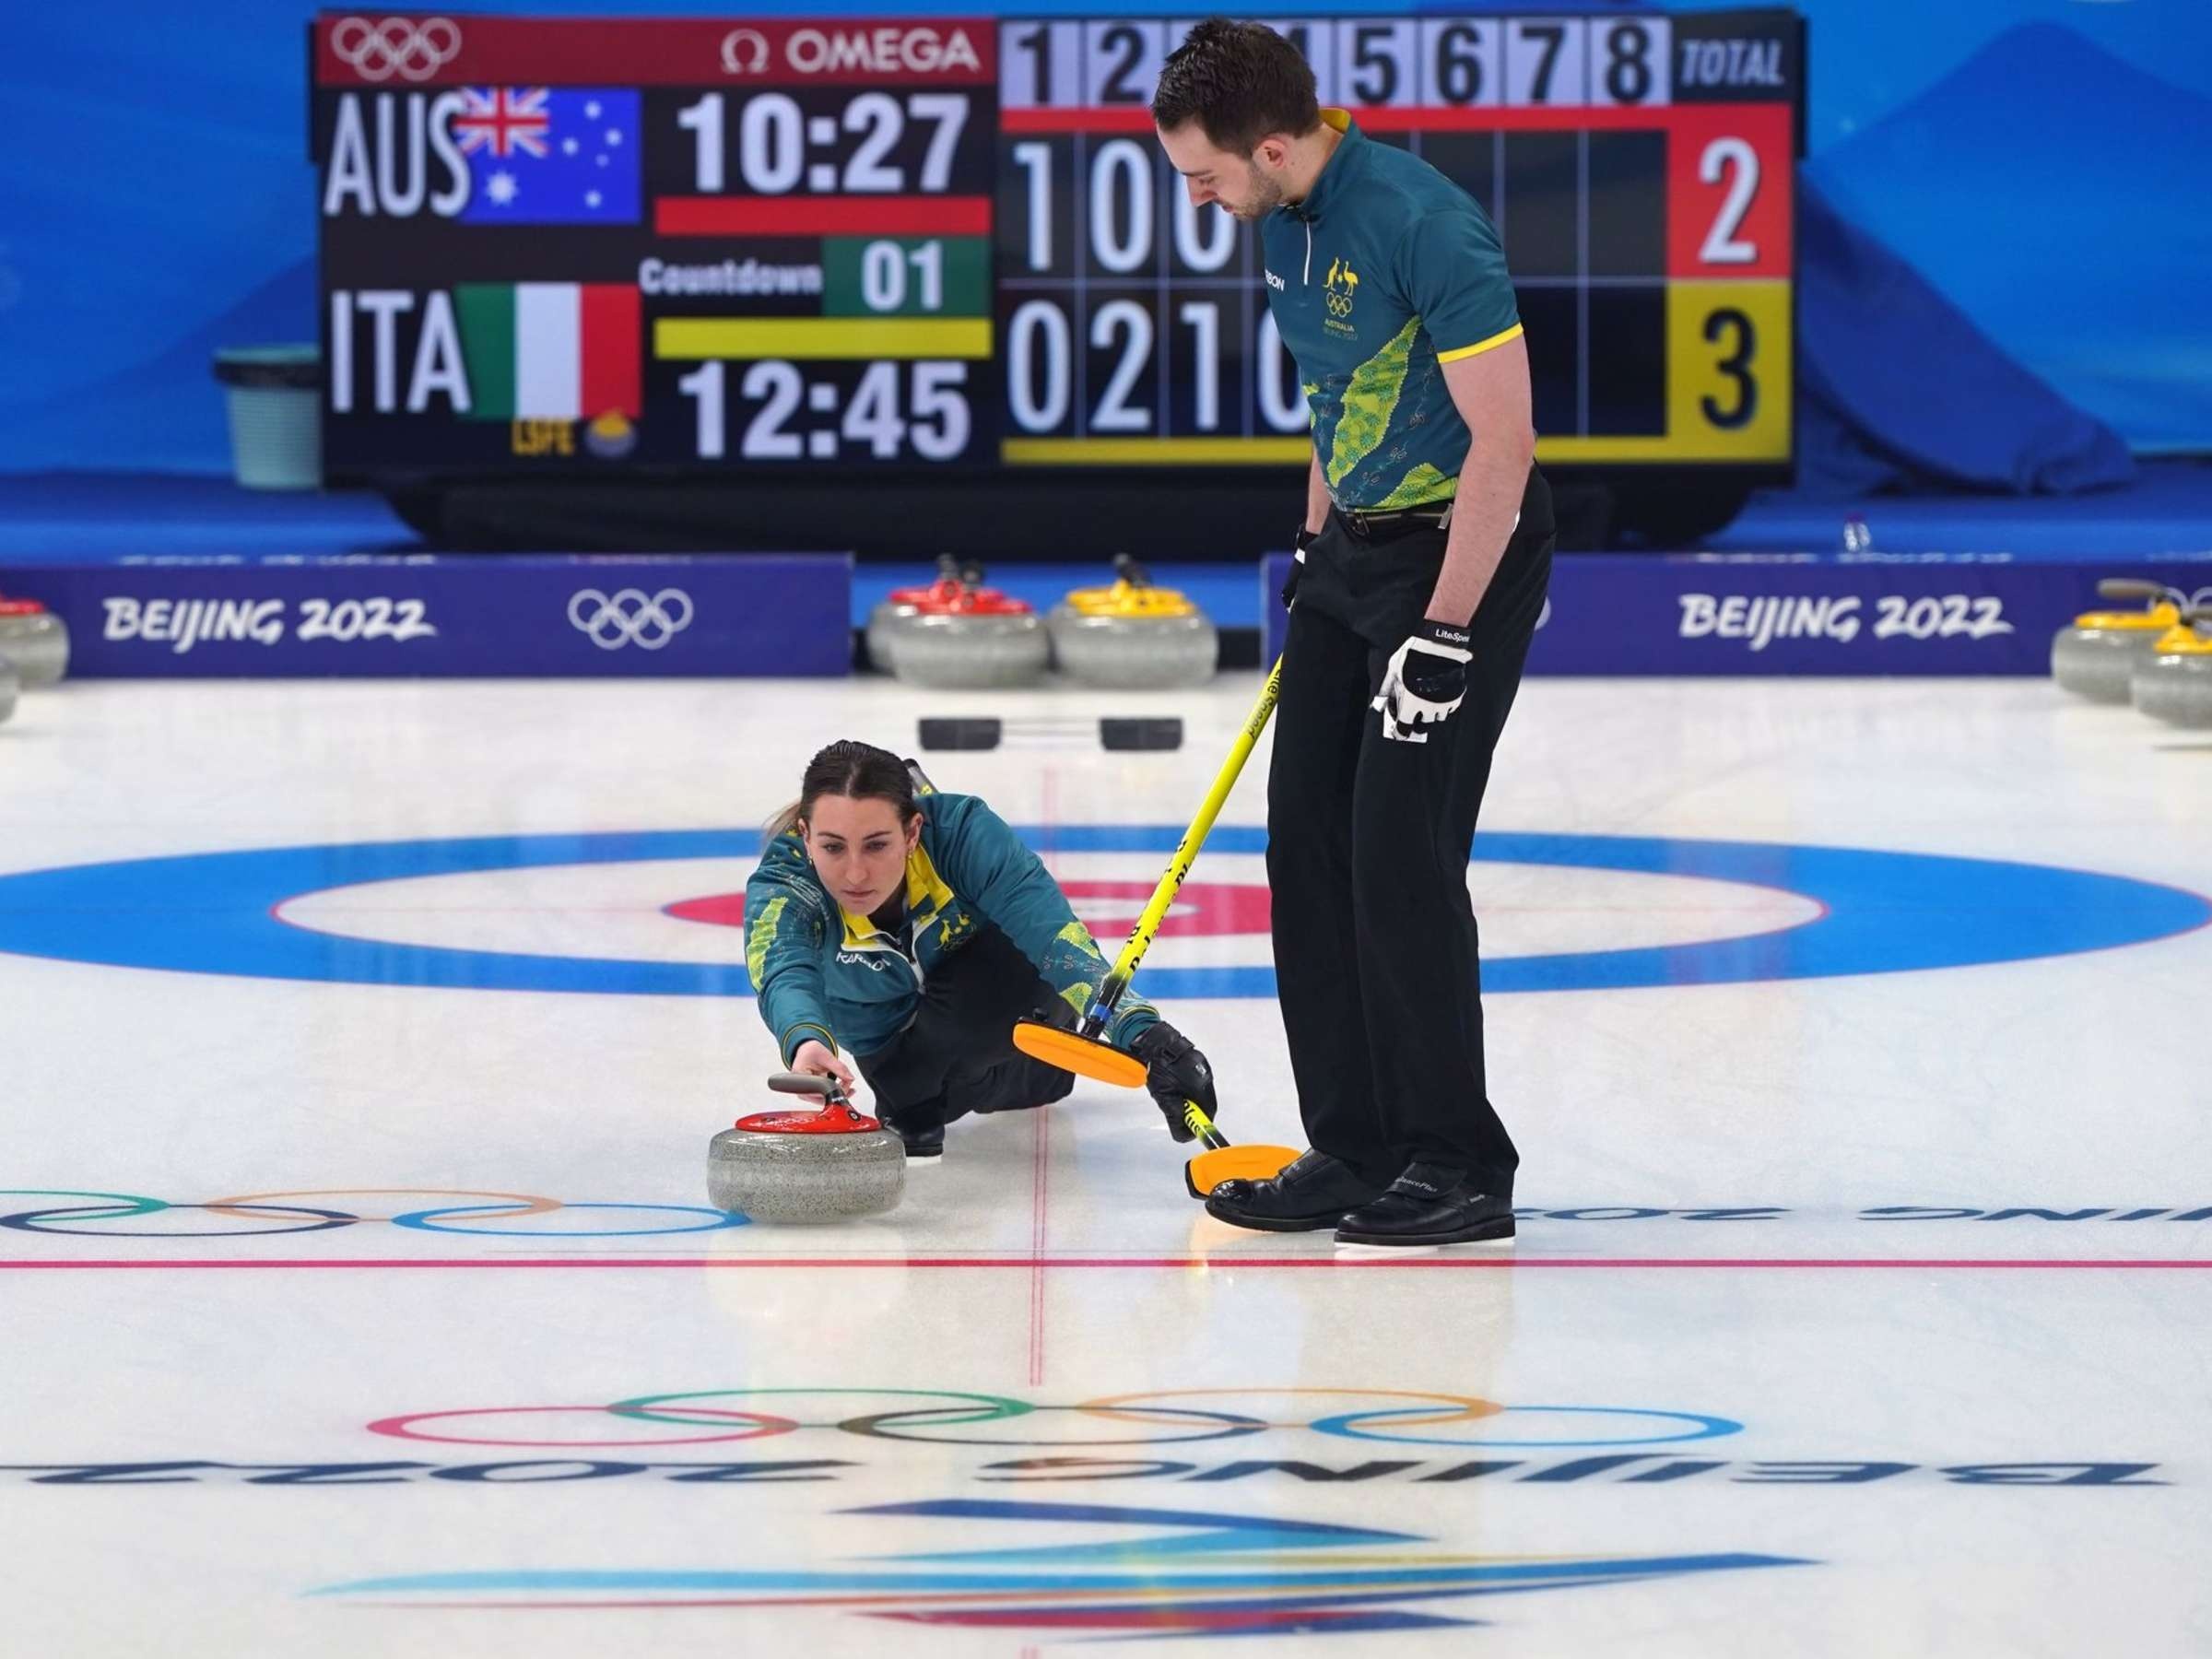 Curling: Australia vs. Italy, The 2022 Beijing Winter Olympic Games, Mixed Doubles event. 2400x1800 HD Wallpaper.